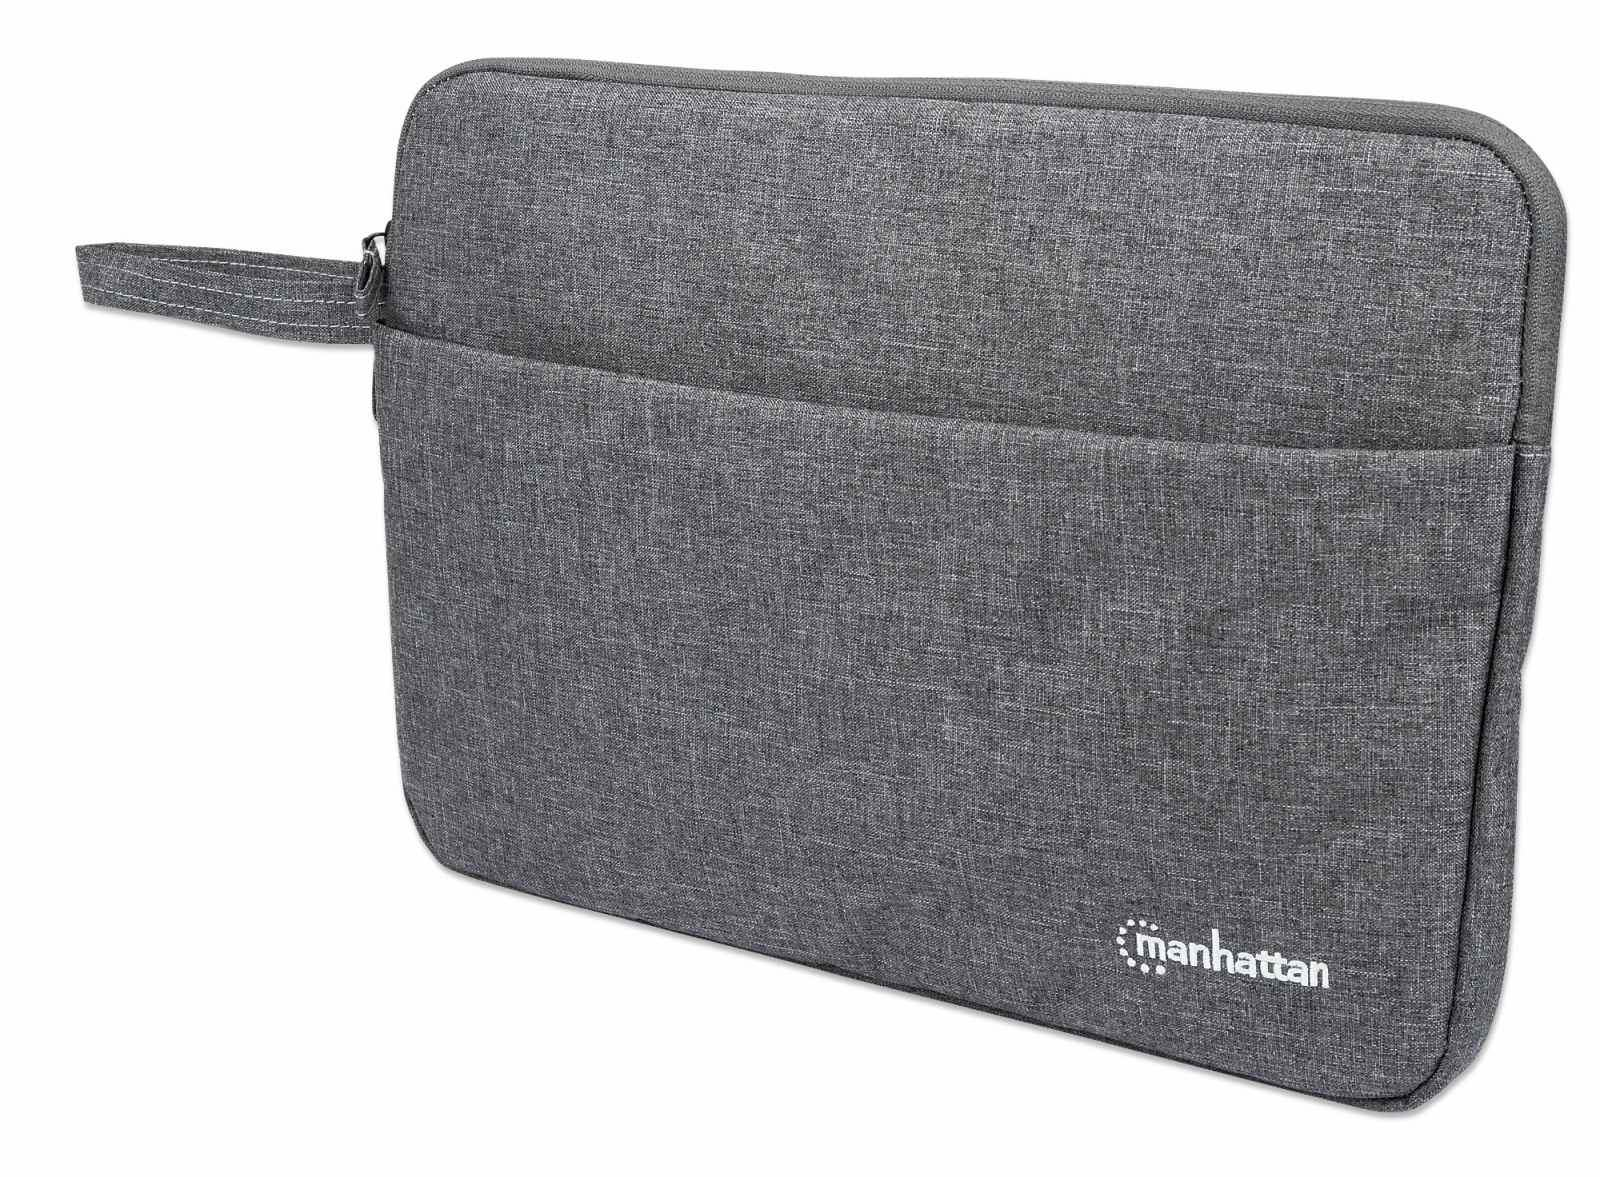 Manhattan Seattle Laptop Sleeve 14.5", Grey, Padded, Extra Soft Internal Cushioning, Main Compartment with double zips, Zippered Front Pocket, Carry Loop, Water Resistant and Durable, Notebook Slipcase, Three Year Warranty